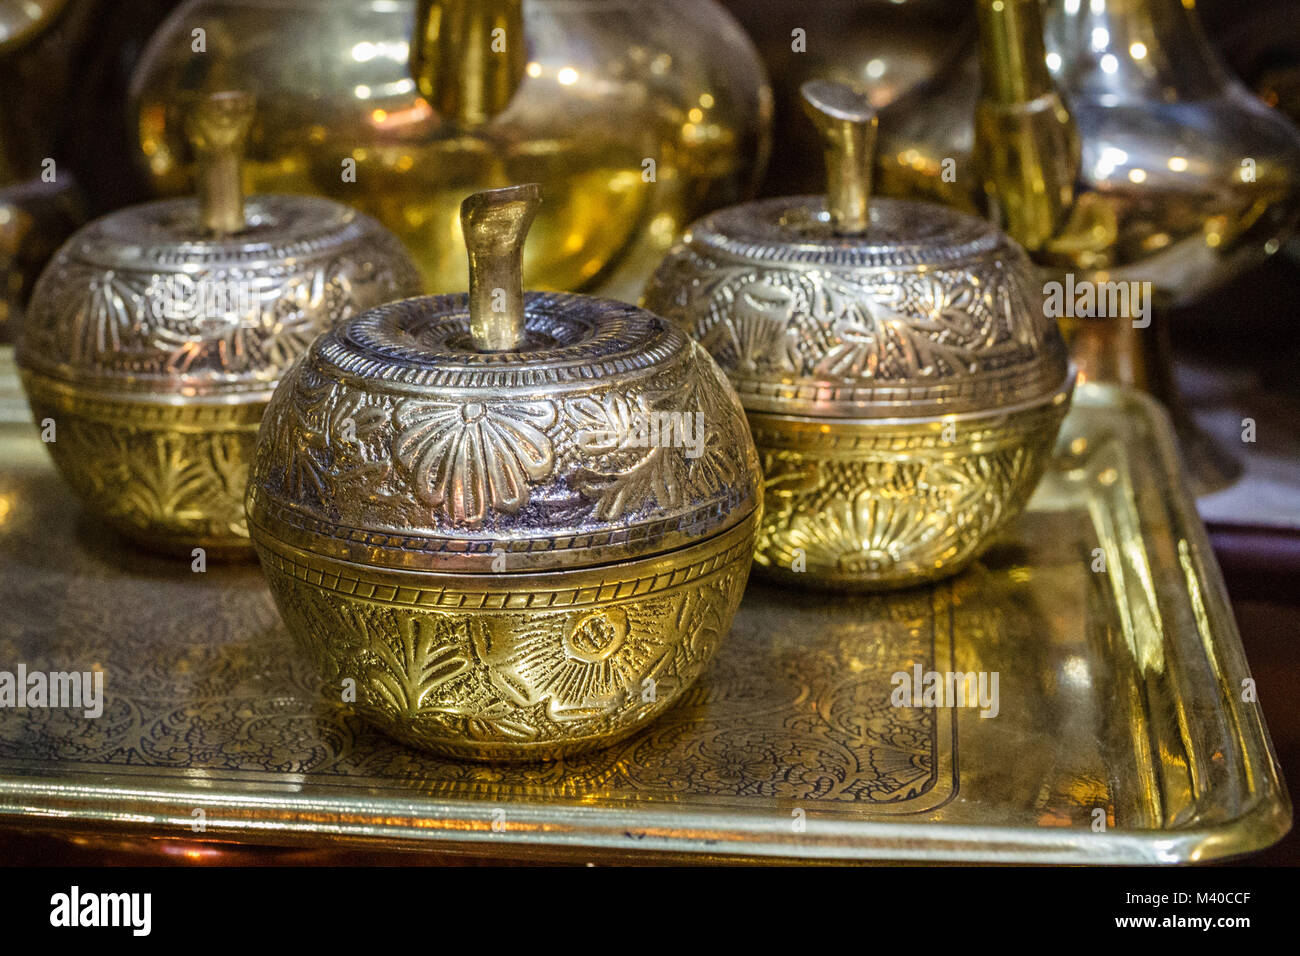 Bronze bowls in a shape of an apple on a tray at a market in Thamel, Kathmandu, Nepal Stock Photo